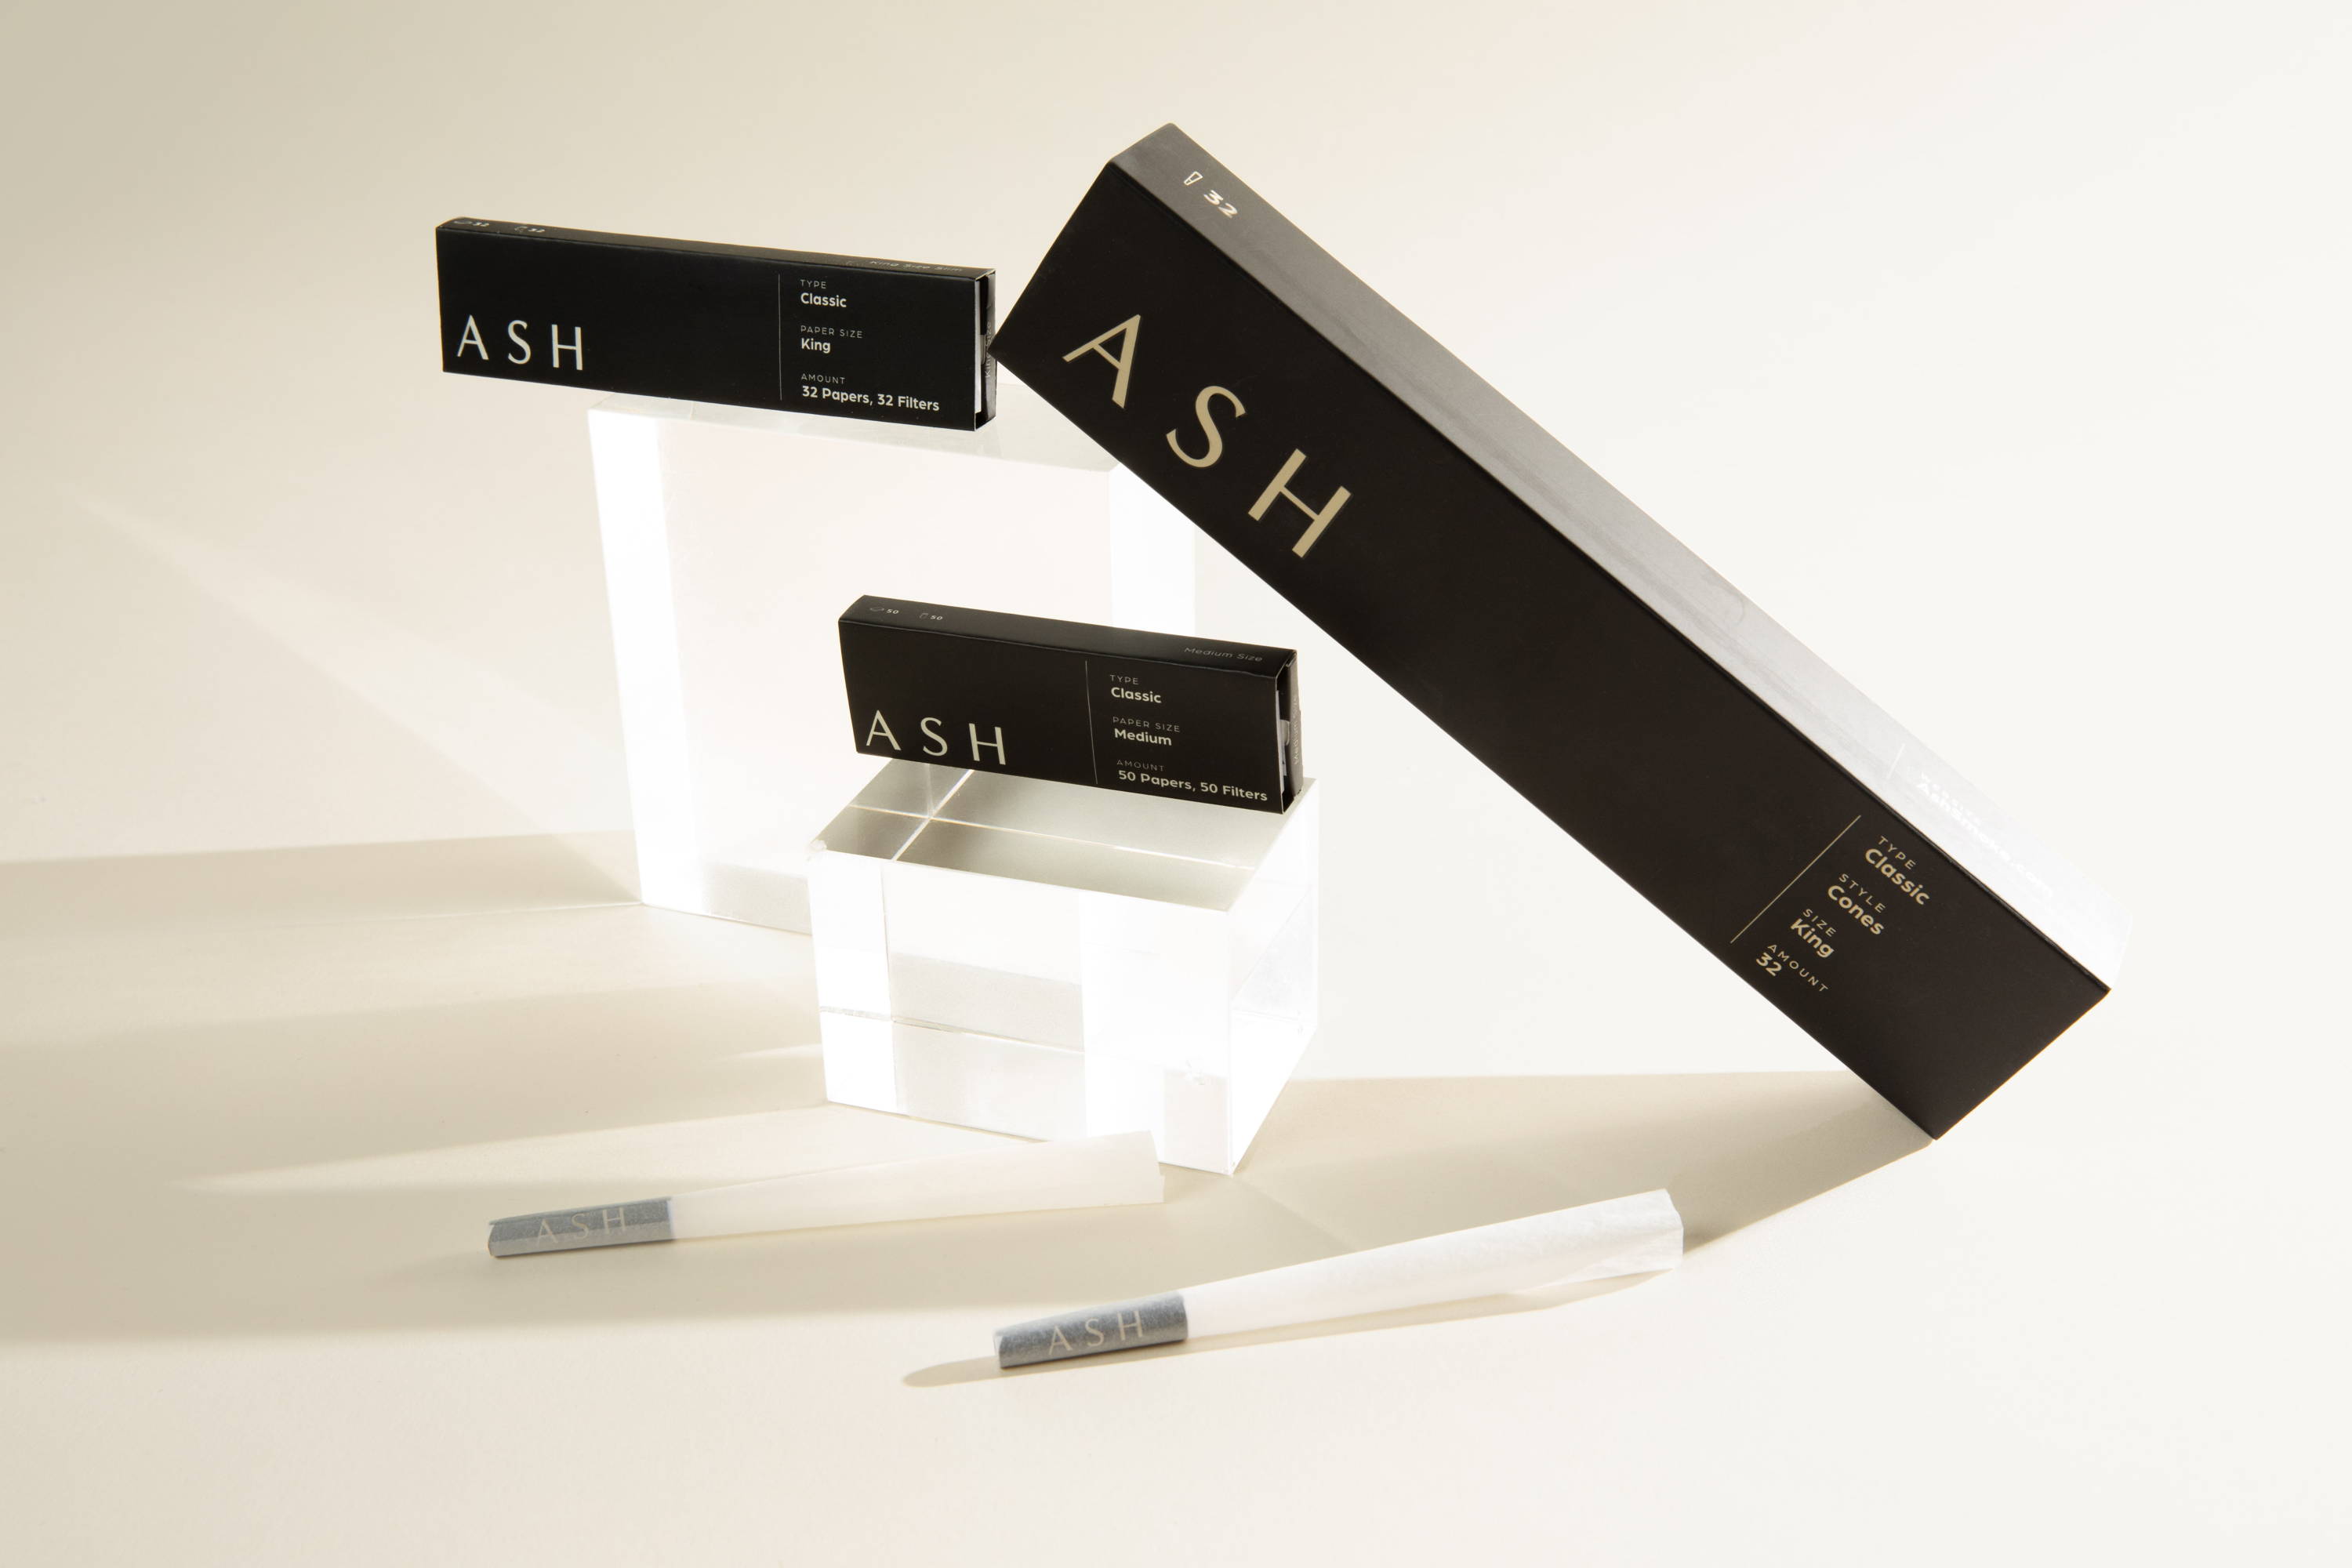 ASH pre rolled cones on product photography